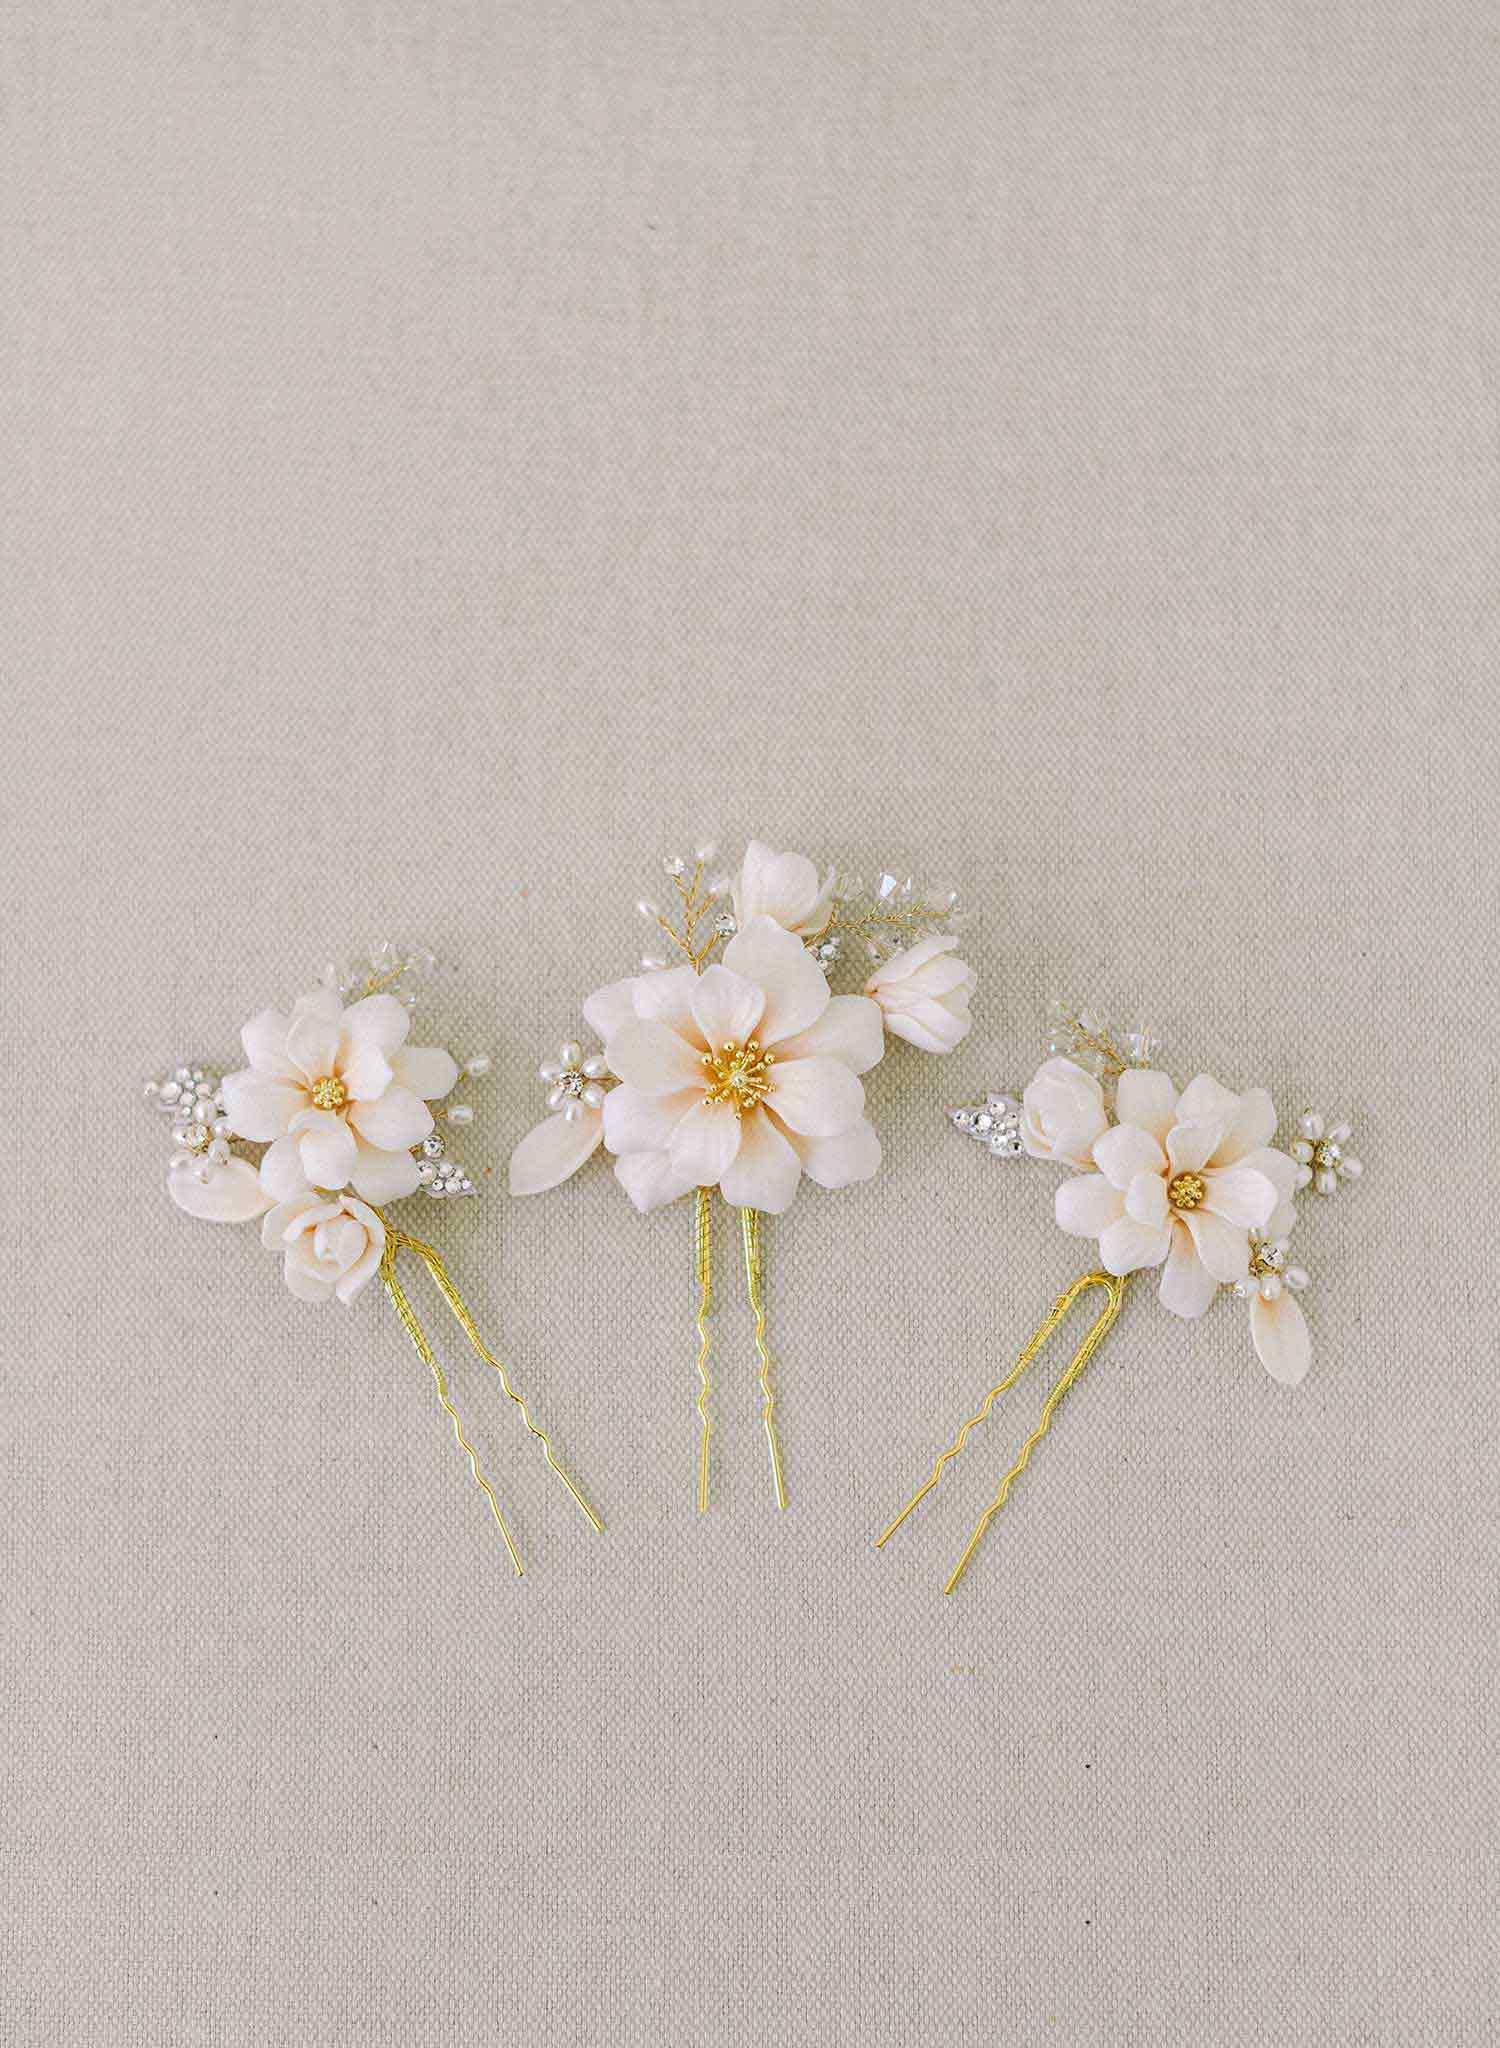 Magnolia blooms pin set of 3 - Style #2320